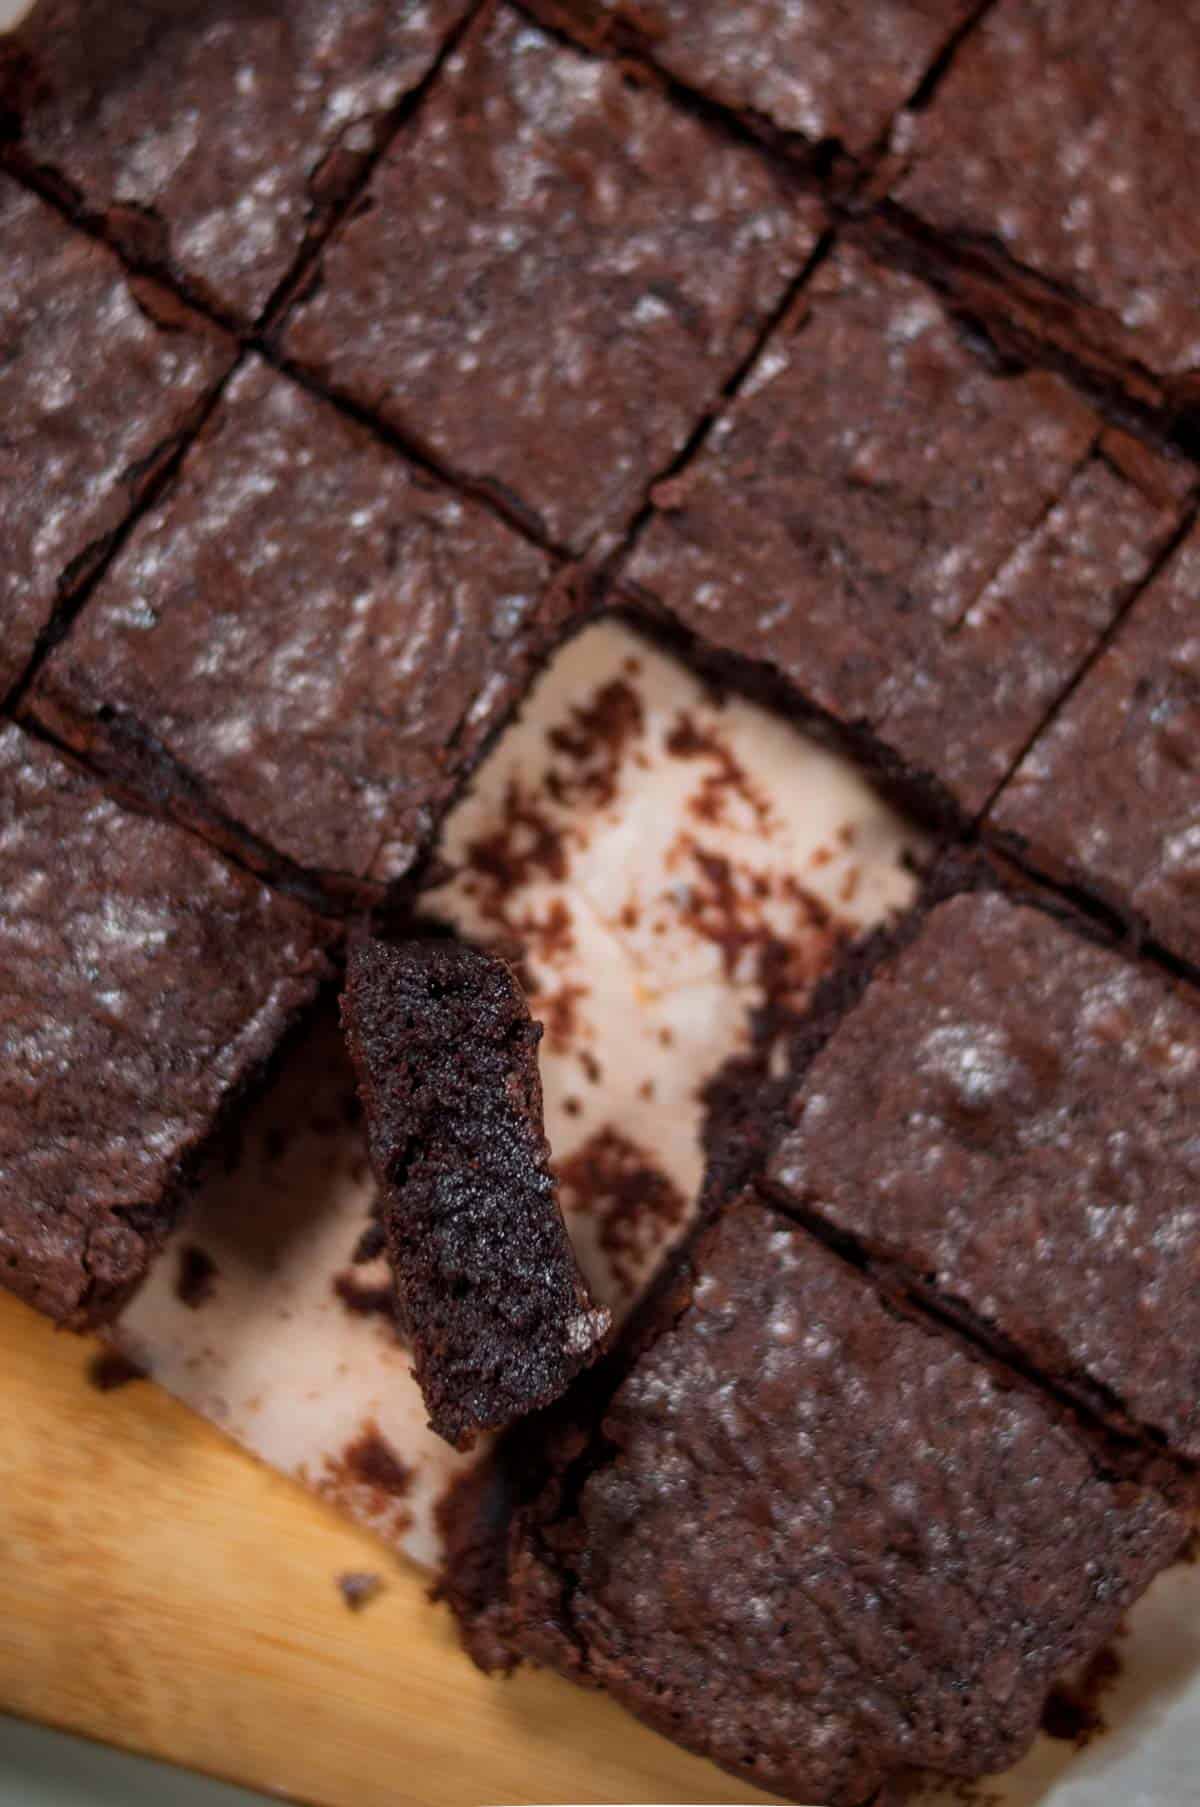 A slice of brownie kept vertically showing fudgy center in the brownie.